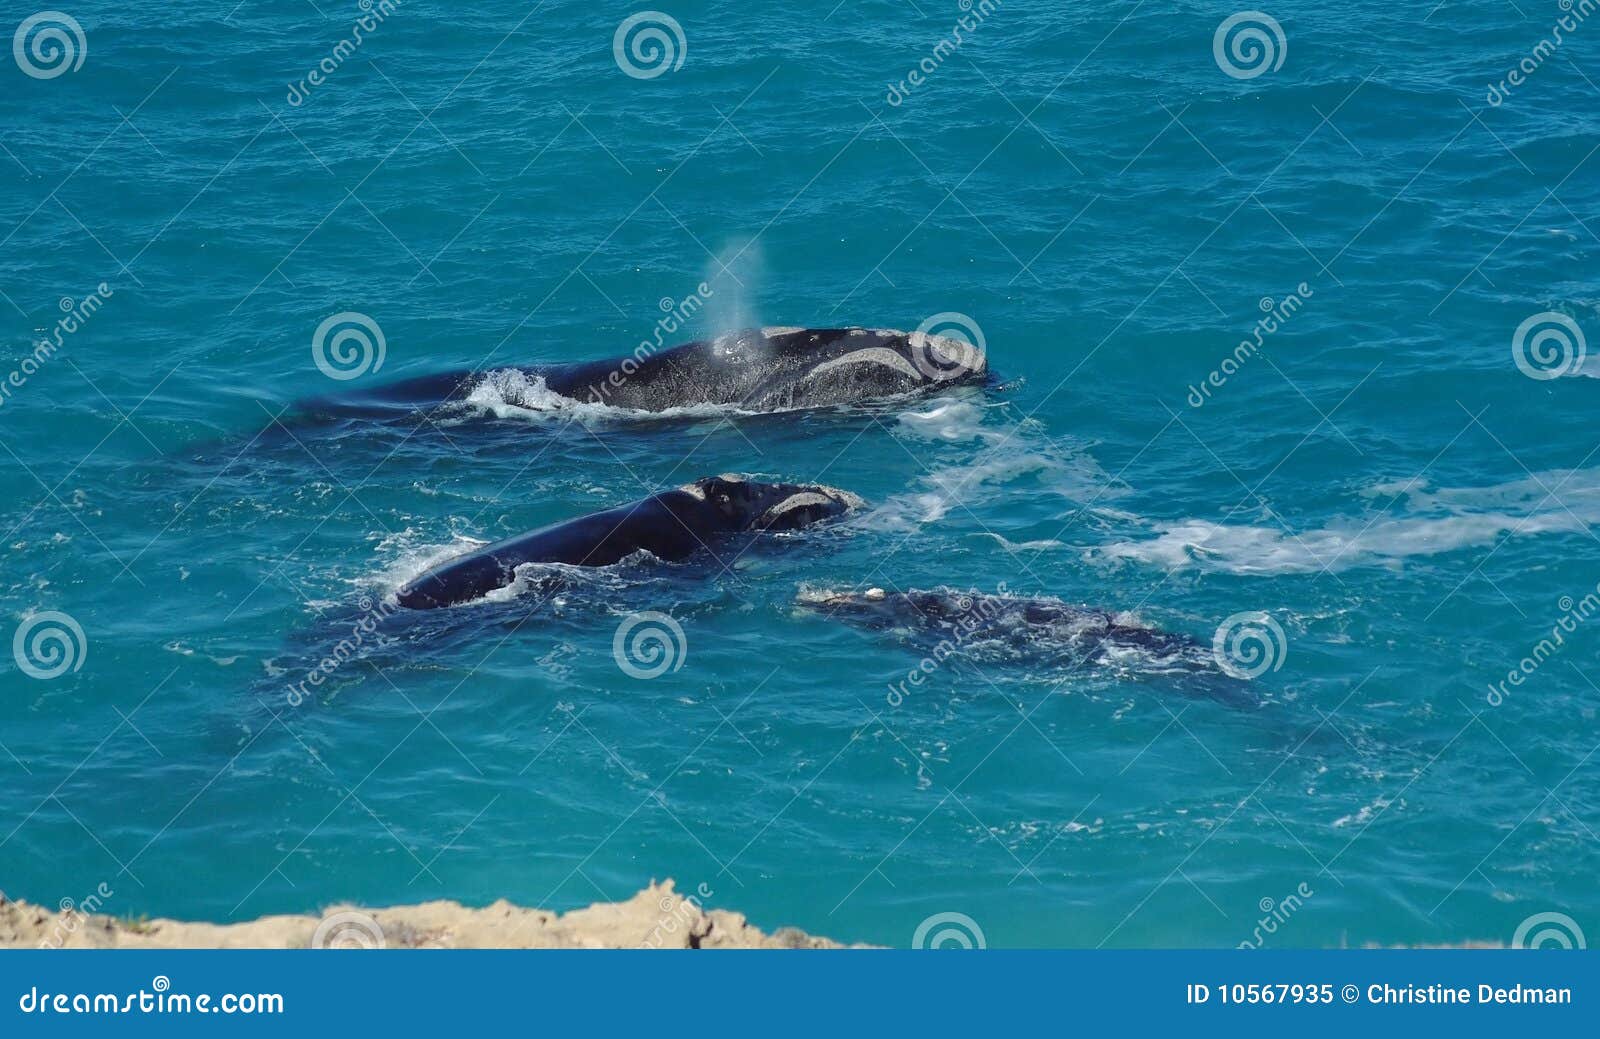 southern right whales